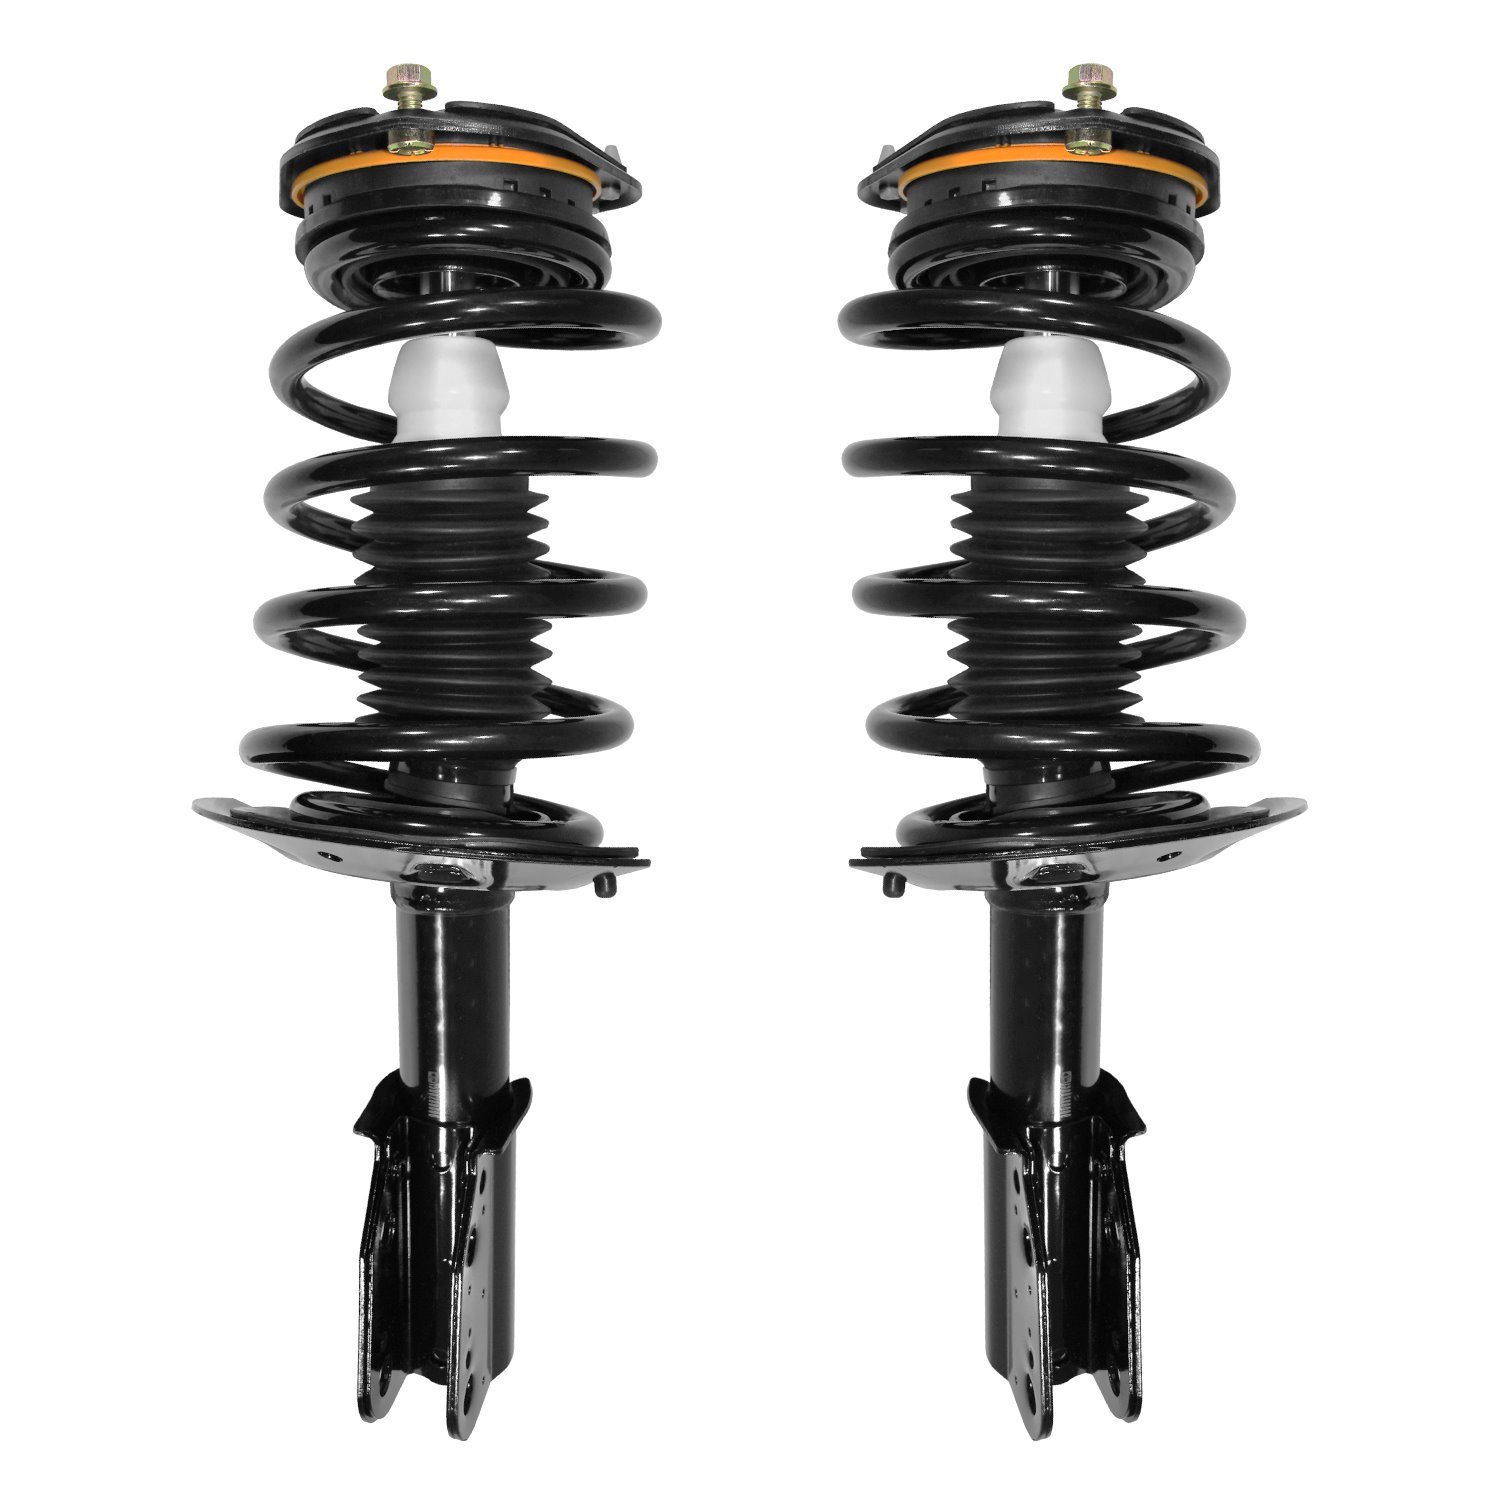 2-11450-001 Suspension Strut & Coil Spring Assembly Set Fits Select Buick Park Avenue, Buick Riviera